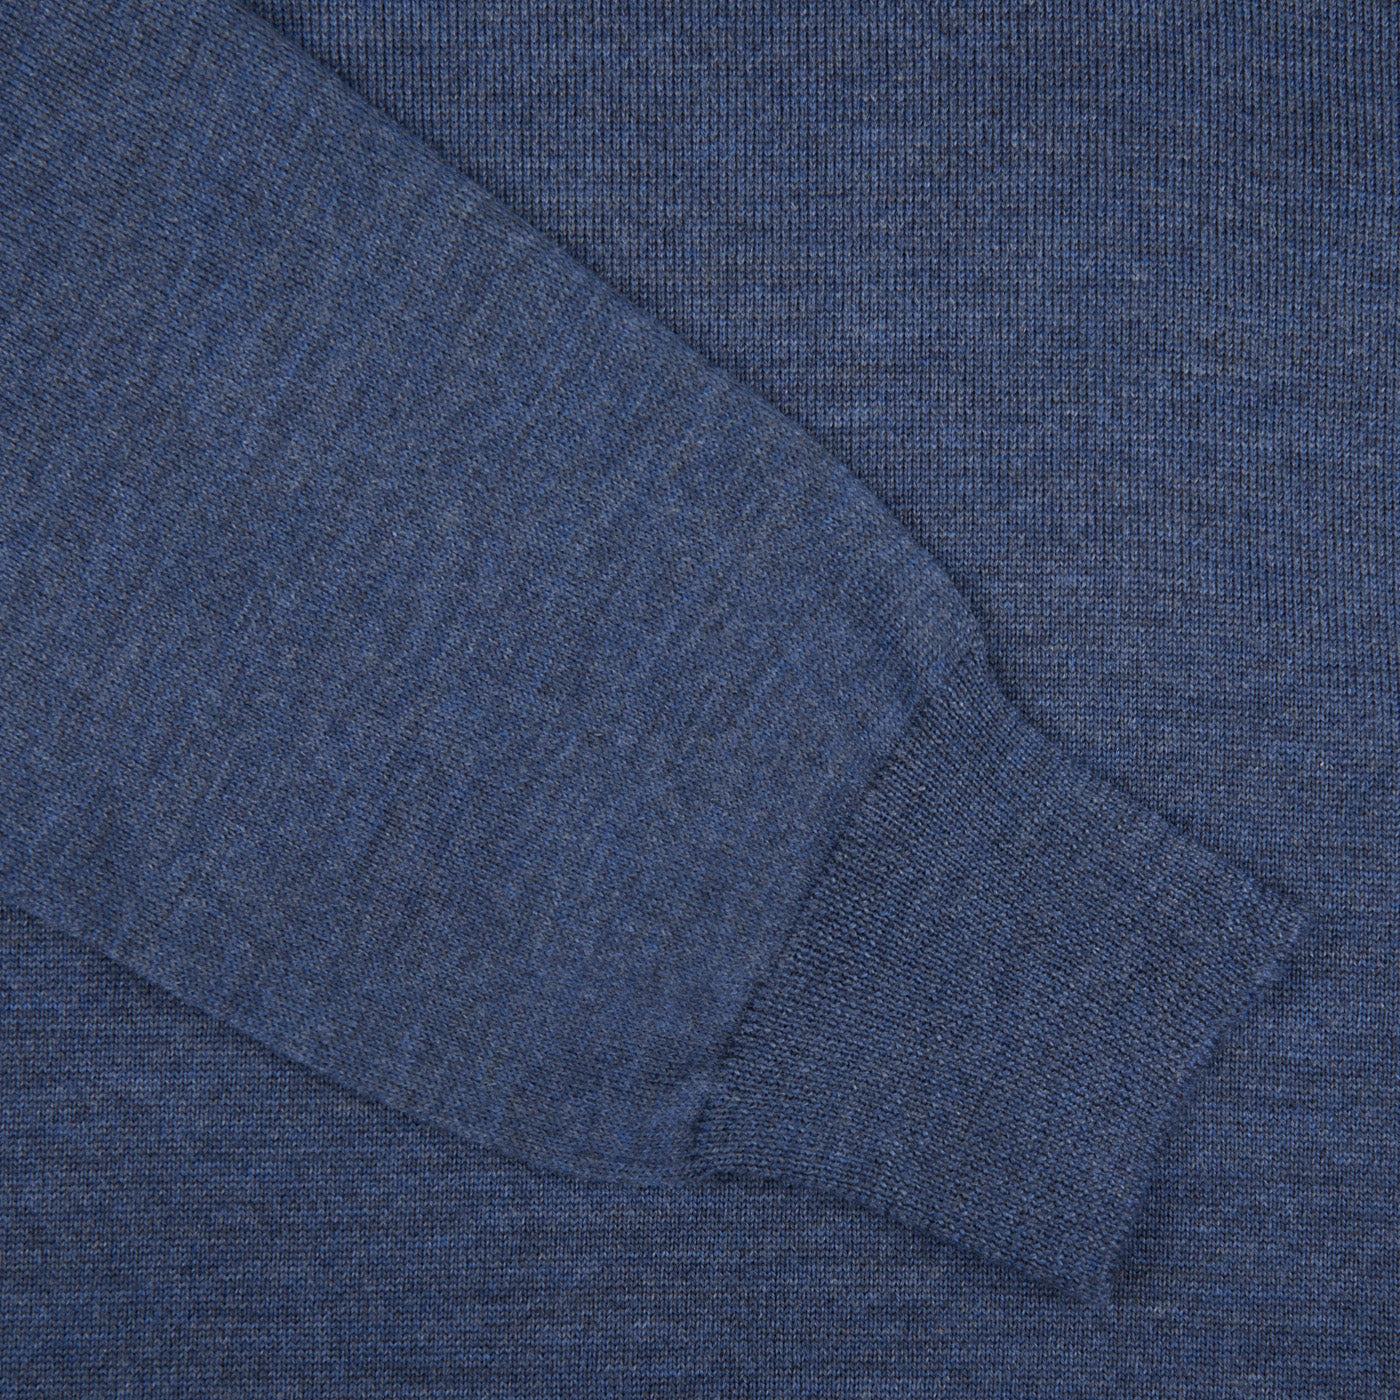 A close up of a Gran Sasso Mid Blue Extra Fine Merino Roll Neck sweater.